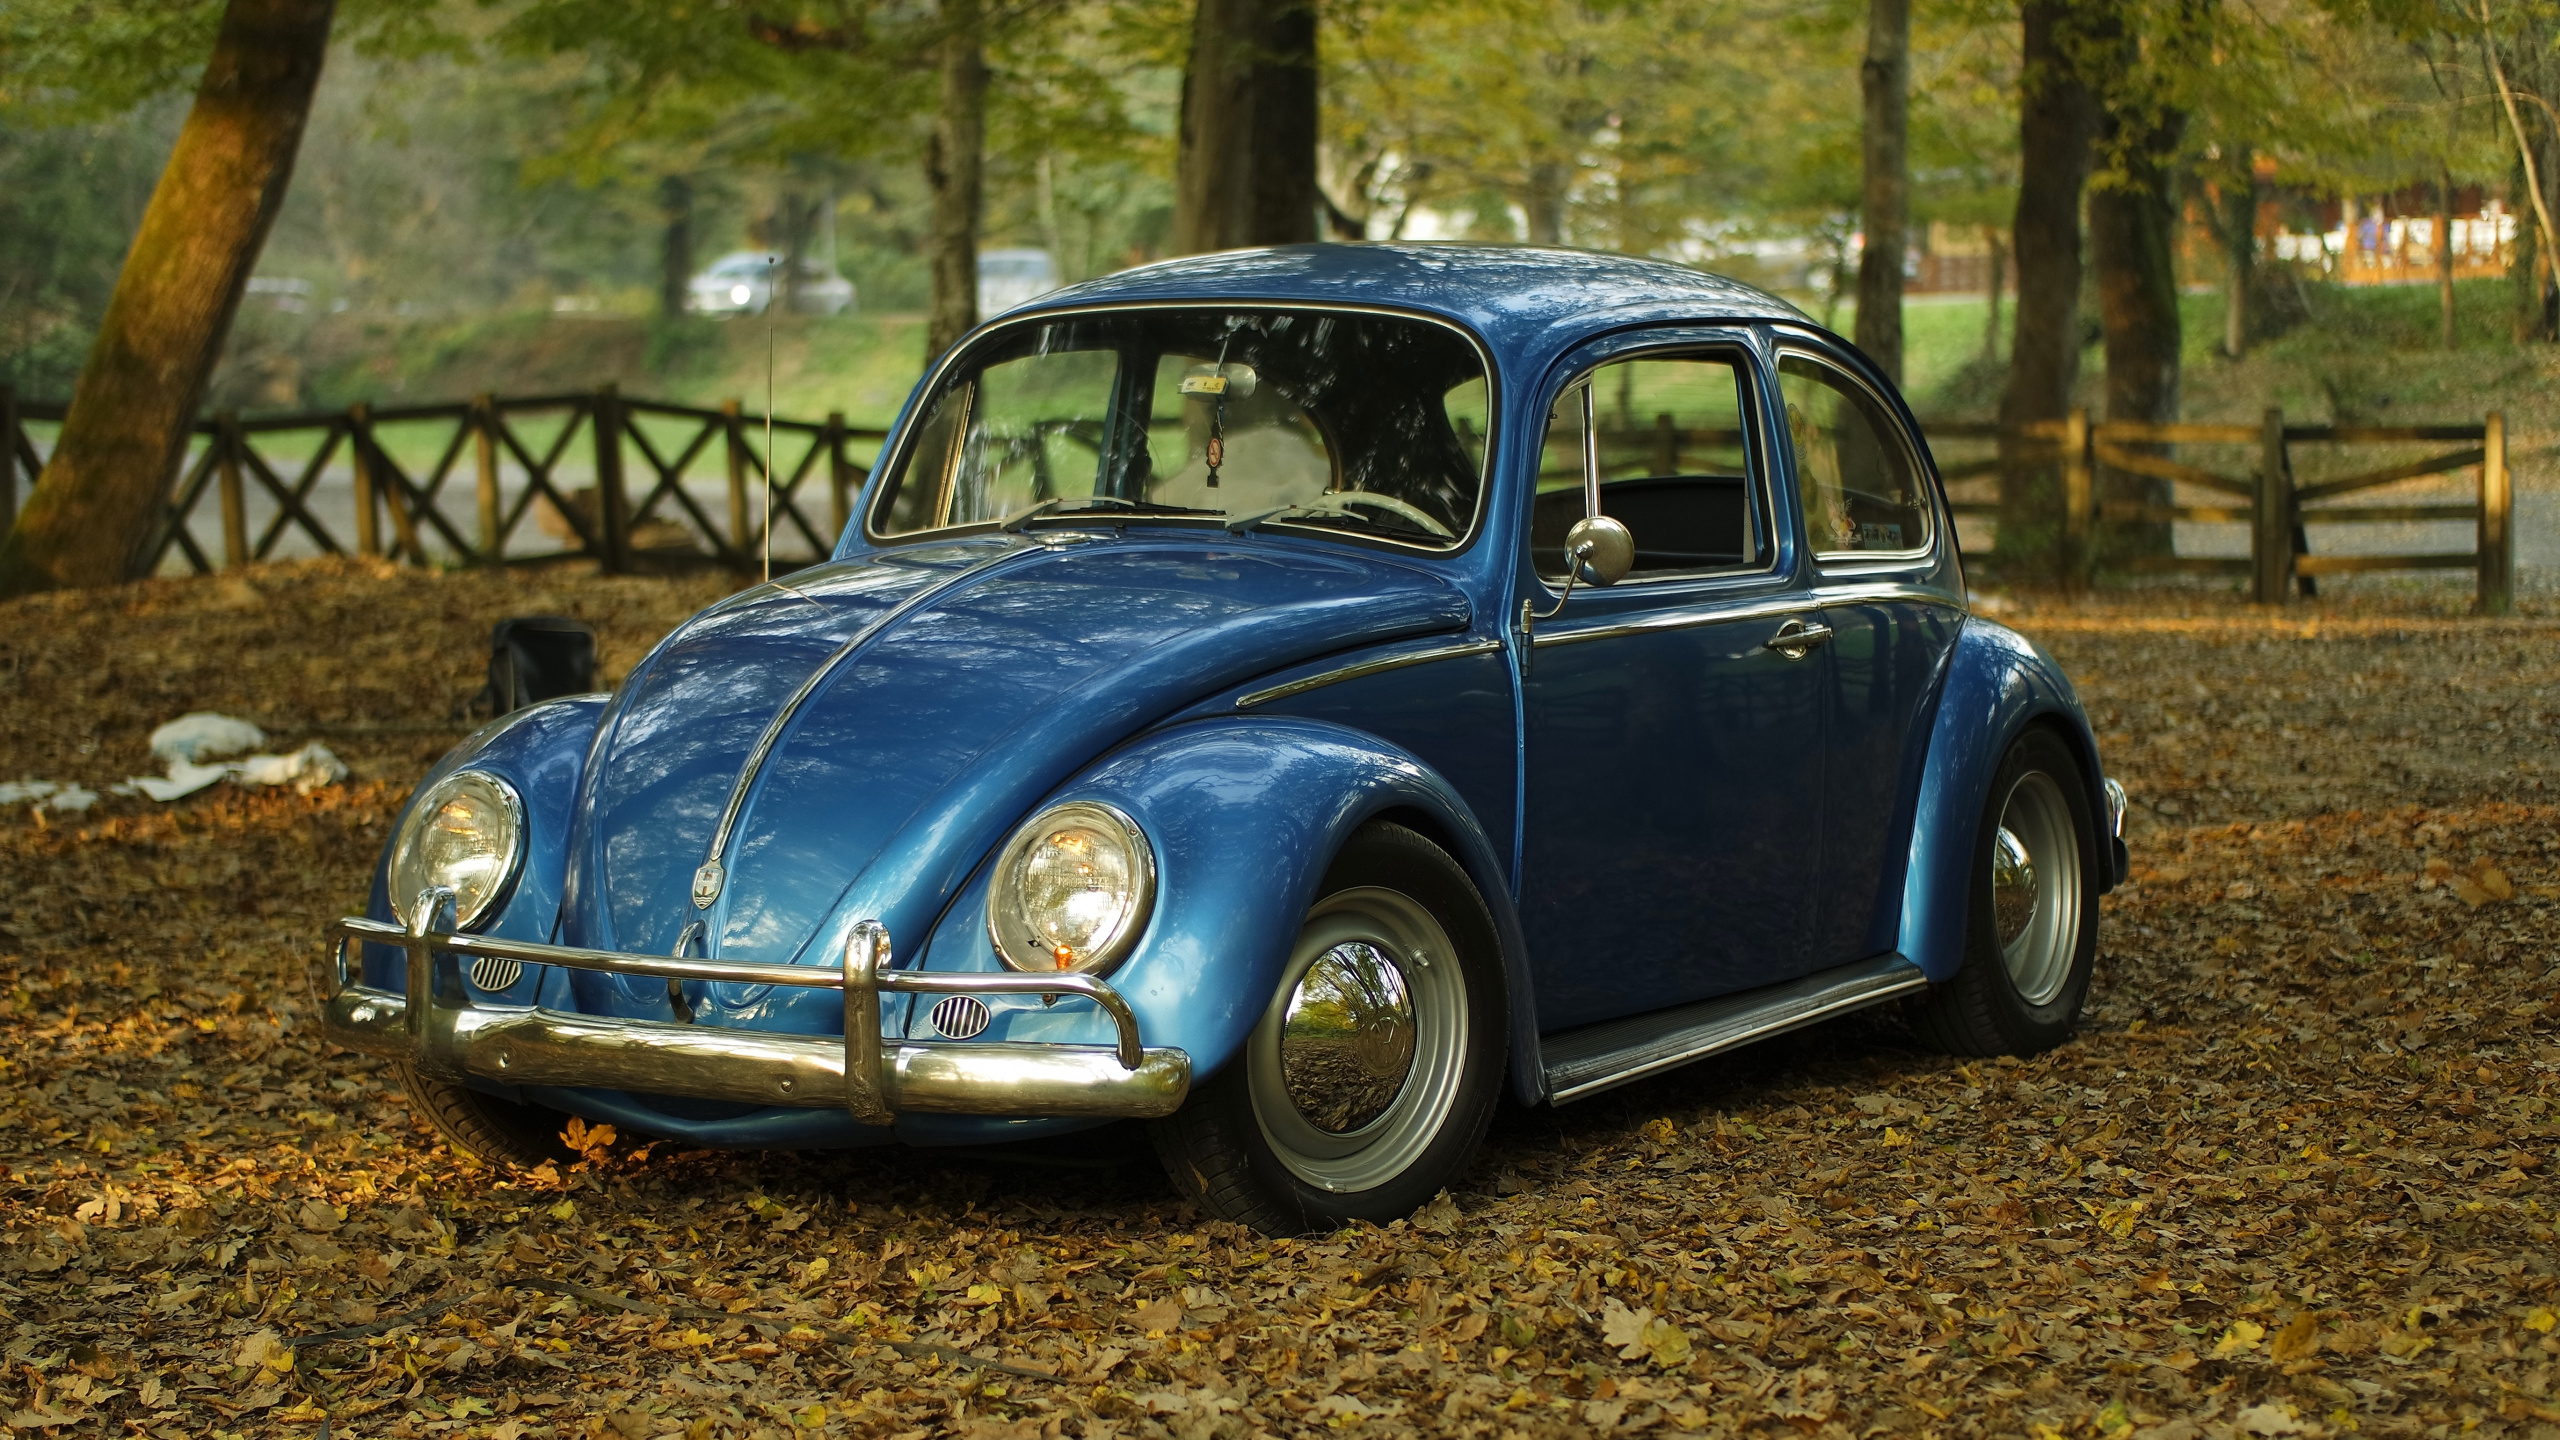 Blue Volkswagen Beetle on Brown Dried Leaves During Daytime. Wallpaper in 2560x1440 Resolution